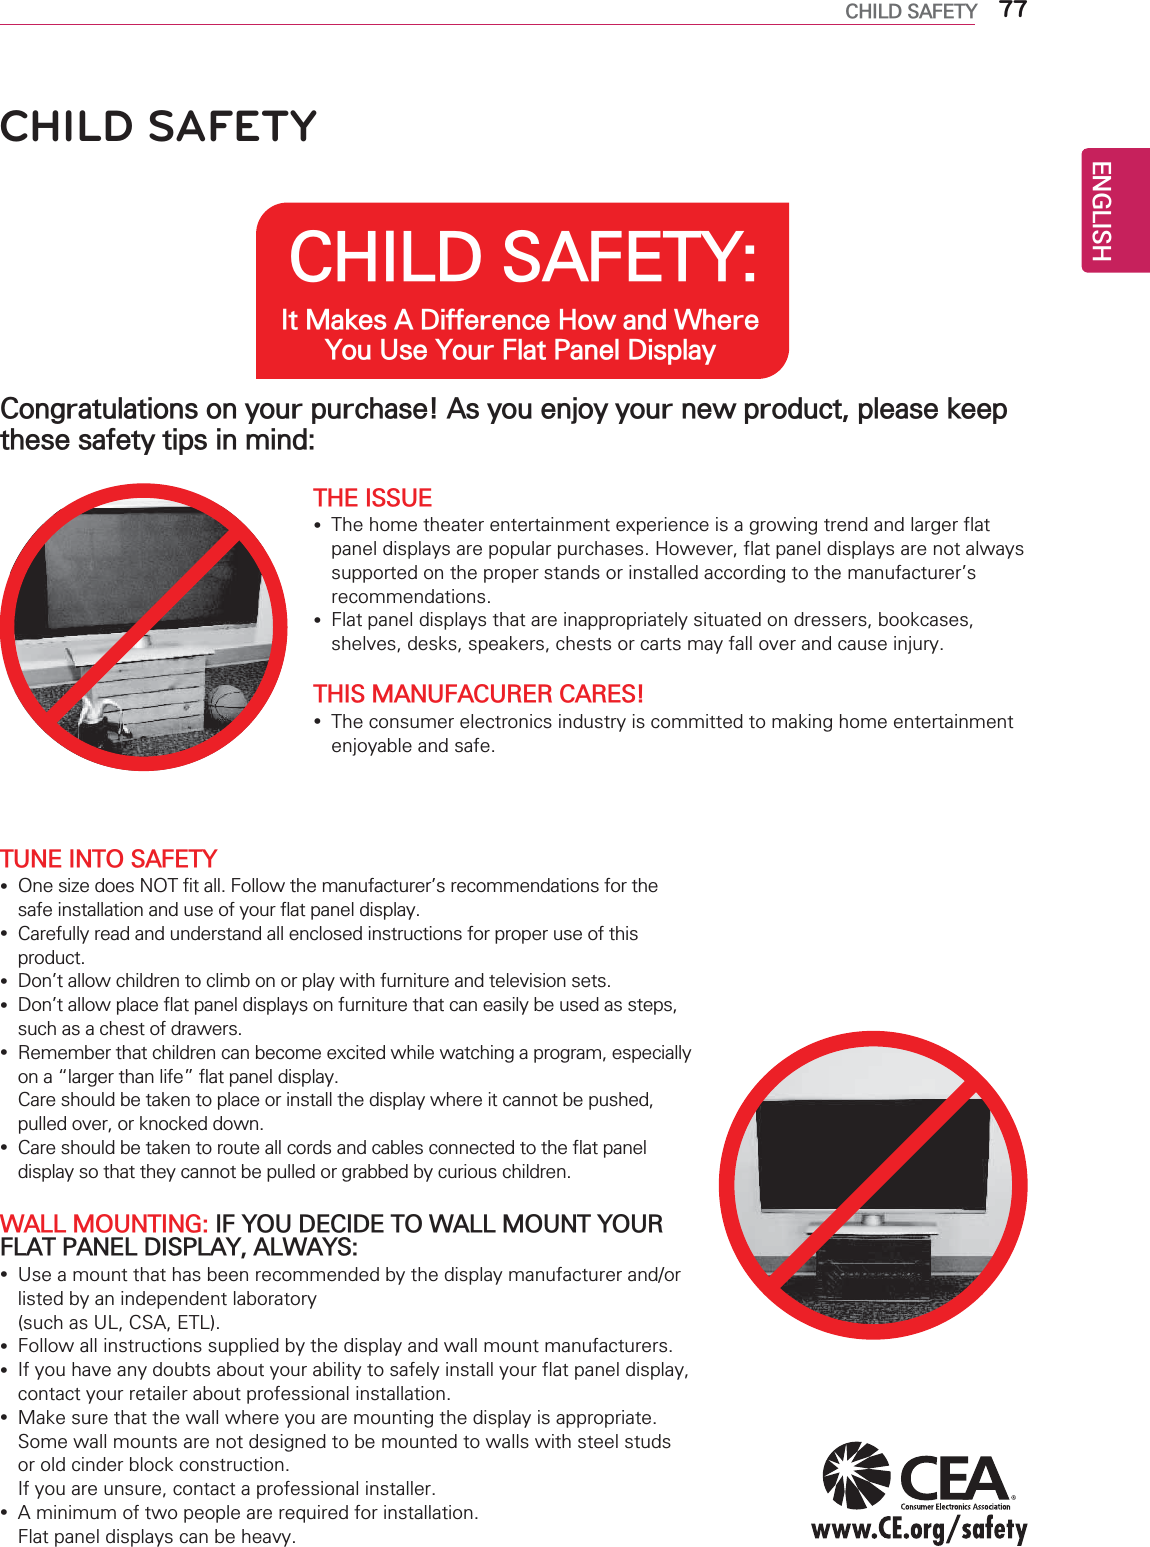 ENGLISH77CHILD SAFETYCHILD SAFETY: It Makes A Difference How and Where You Use Your Flat Panel DisplayCongratulations on your purchase! As you enjoy your new product, please keep these safety tips in mind:THE ISSUE yThe home theater entertainment experience is a growing trend and larger flat panel displays are popular purchases. However, flat panel displays are not always supported on the proper stands or installed according to the manufacturer’s recommendations. yFlat panel displays that are inappropriately situated on dressers, bookcases, shelves, desks, speakers, chests or carts may fall over and cause injury.THIS MANUFACURER CARES! yThe consumer electronics industry is committed to making home entertainment enjoyable and safe.TUNE INTO SAFETY yOne size does NOT fit all. Follow the manufacturer’s recommendations for the safe installation and use of your flat panel display. yCarefully read and understand all enclosed instructions for proper use of this product. yDon’t allow children to climb on or play with furniture and television sets. yDon’t allow place flat panel displays on furniture that can easily be used as steps, such as a chest of drawers. yRemember that children can become excited while watching a program, especially on a “larger than life” flat panel display.  Care should be taken to place or install the display where it cannot be pushed, pulled over, or knocked down. yCare should be taken to route all cords and cables connected to the flat panel display so that they cannot be pulled or grabbed by curious children.WALL MOUNTING: IF YOU DECIDE TO WALL MOUNT YOUR FLAT PANEL DISPLAY, ALWAYS: yUse a mount that has been recommended by the display manufacturer and/or listed by an independent laboratory  (such as UL, CSA, ETL). yFollow all instructions supplied by the display and wall mount manufacturers. yIf you have any doubts about your ability to safely install your flat panel display, contact your retailer about professional installation. yMake sure that the wall where you are mounting the display is appropriate. Some wall mounts are not designed to be mounted to walls with steel studs or old cinder block construction.  If you are unsure, contact a professional installer. yA minimum of two people are required for installation.  Flat panel displays can be heavy.CHILD SAFETY